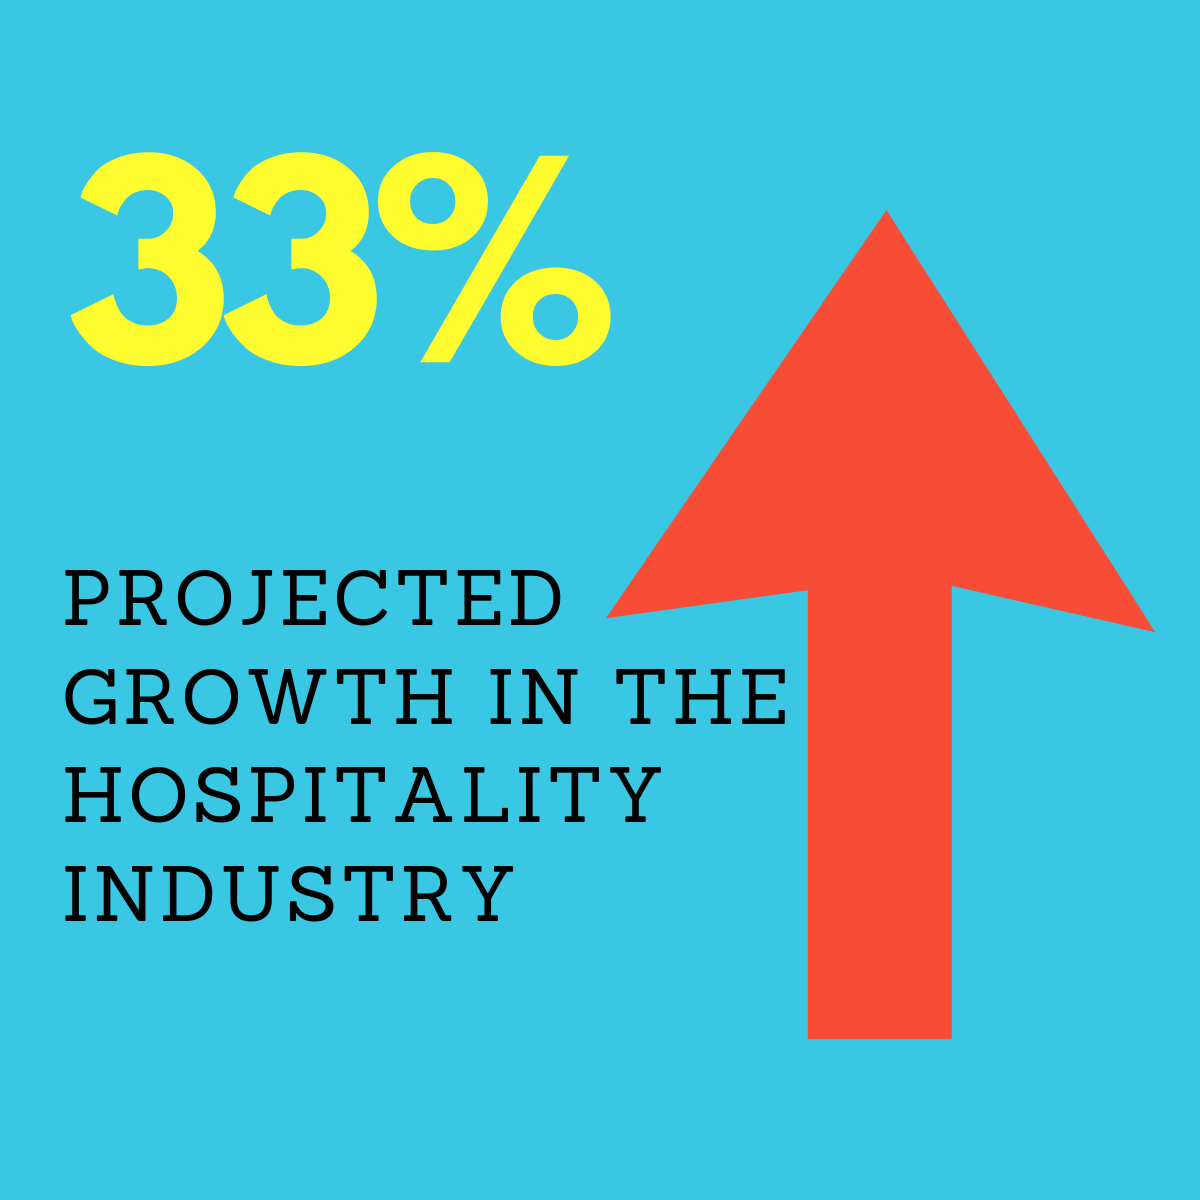 33% projected growth in the hospitality industry